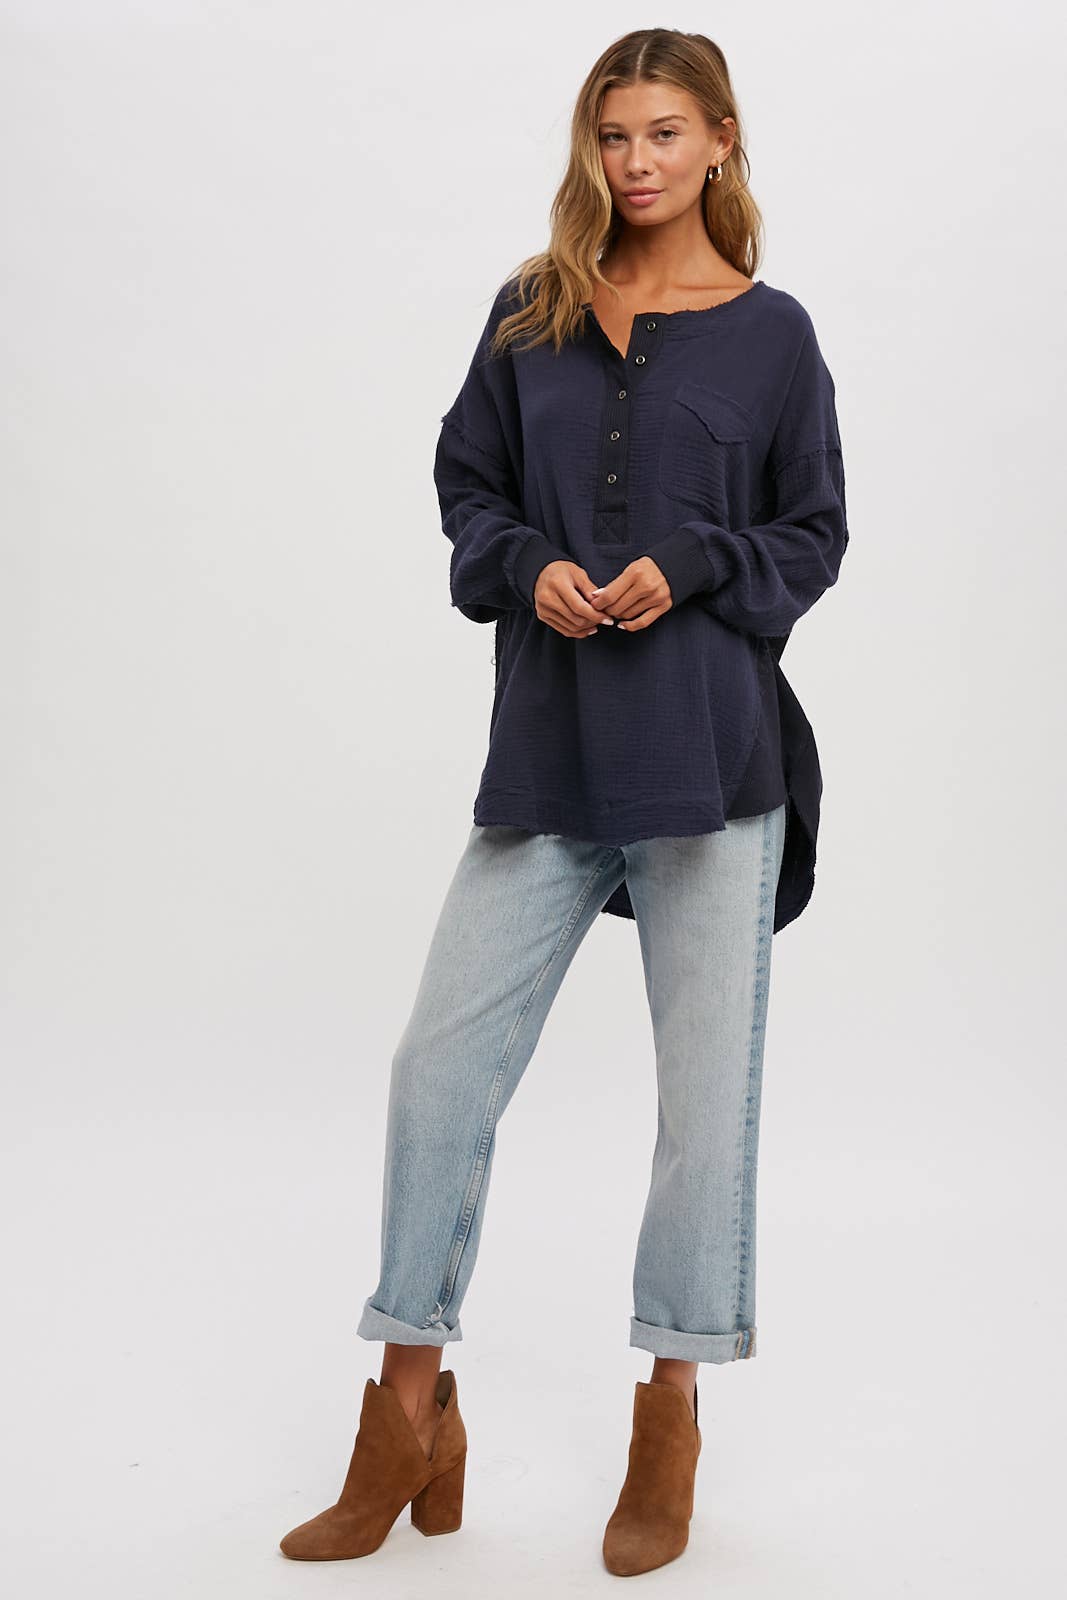 BUTTON UP HENLEY TUNIC: M/L / NAVY